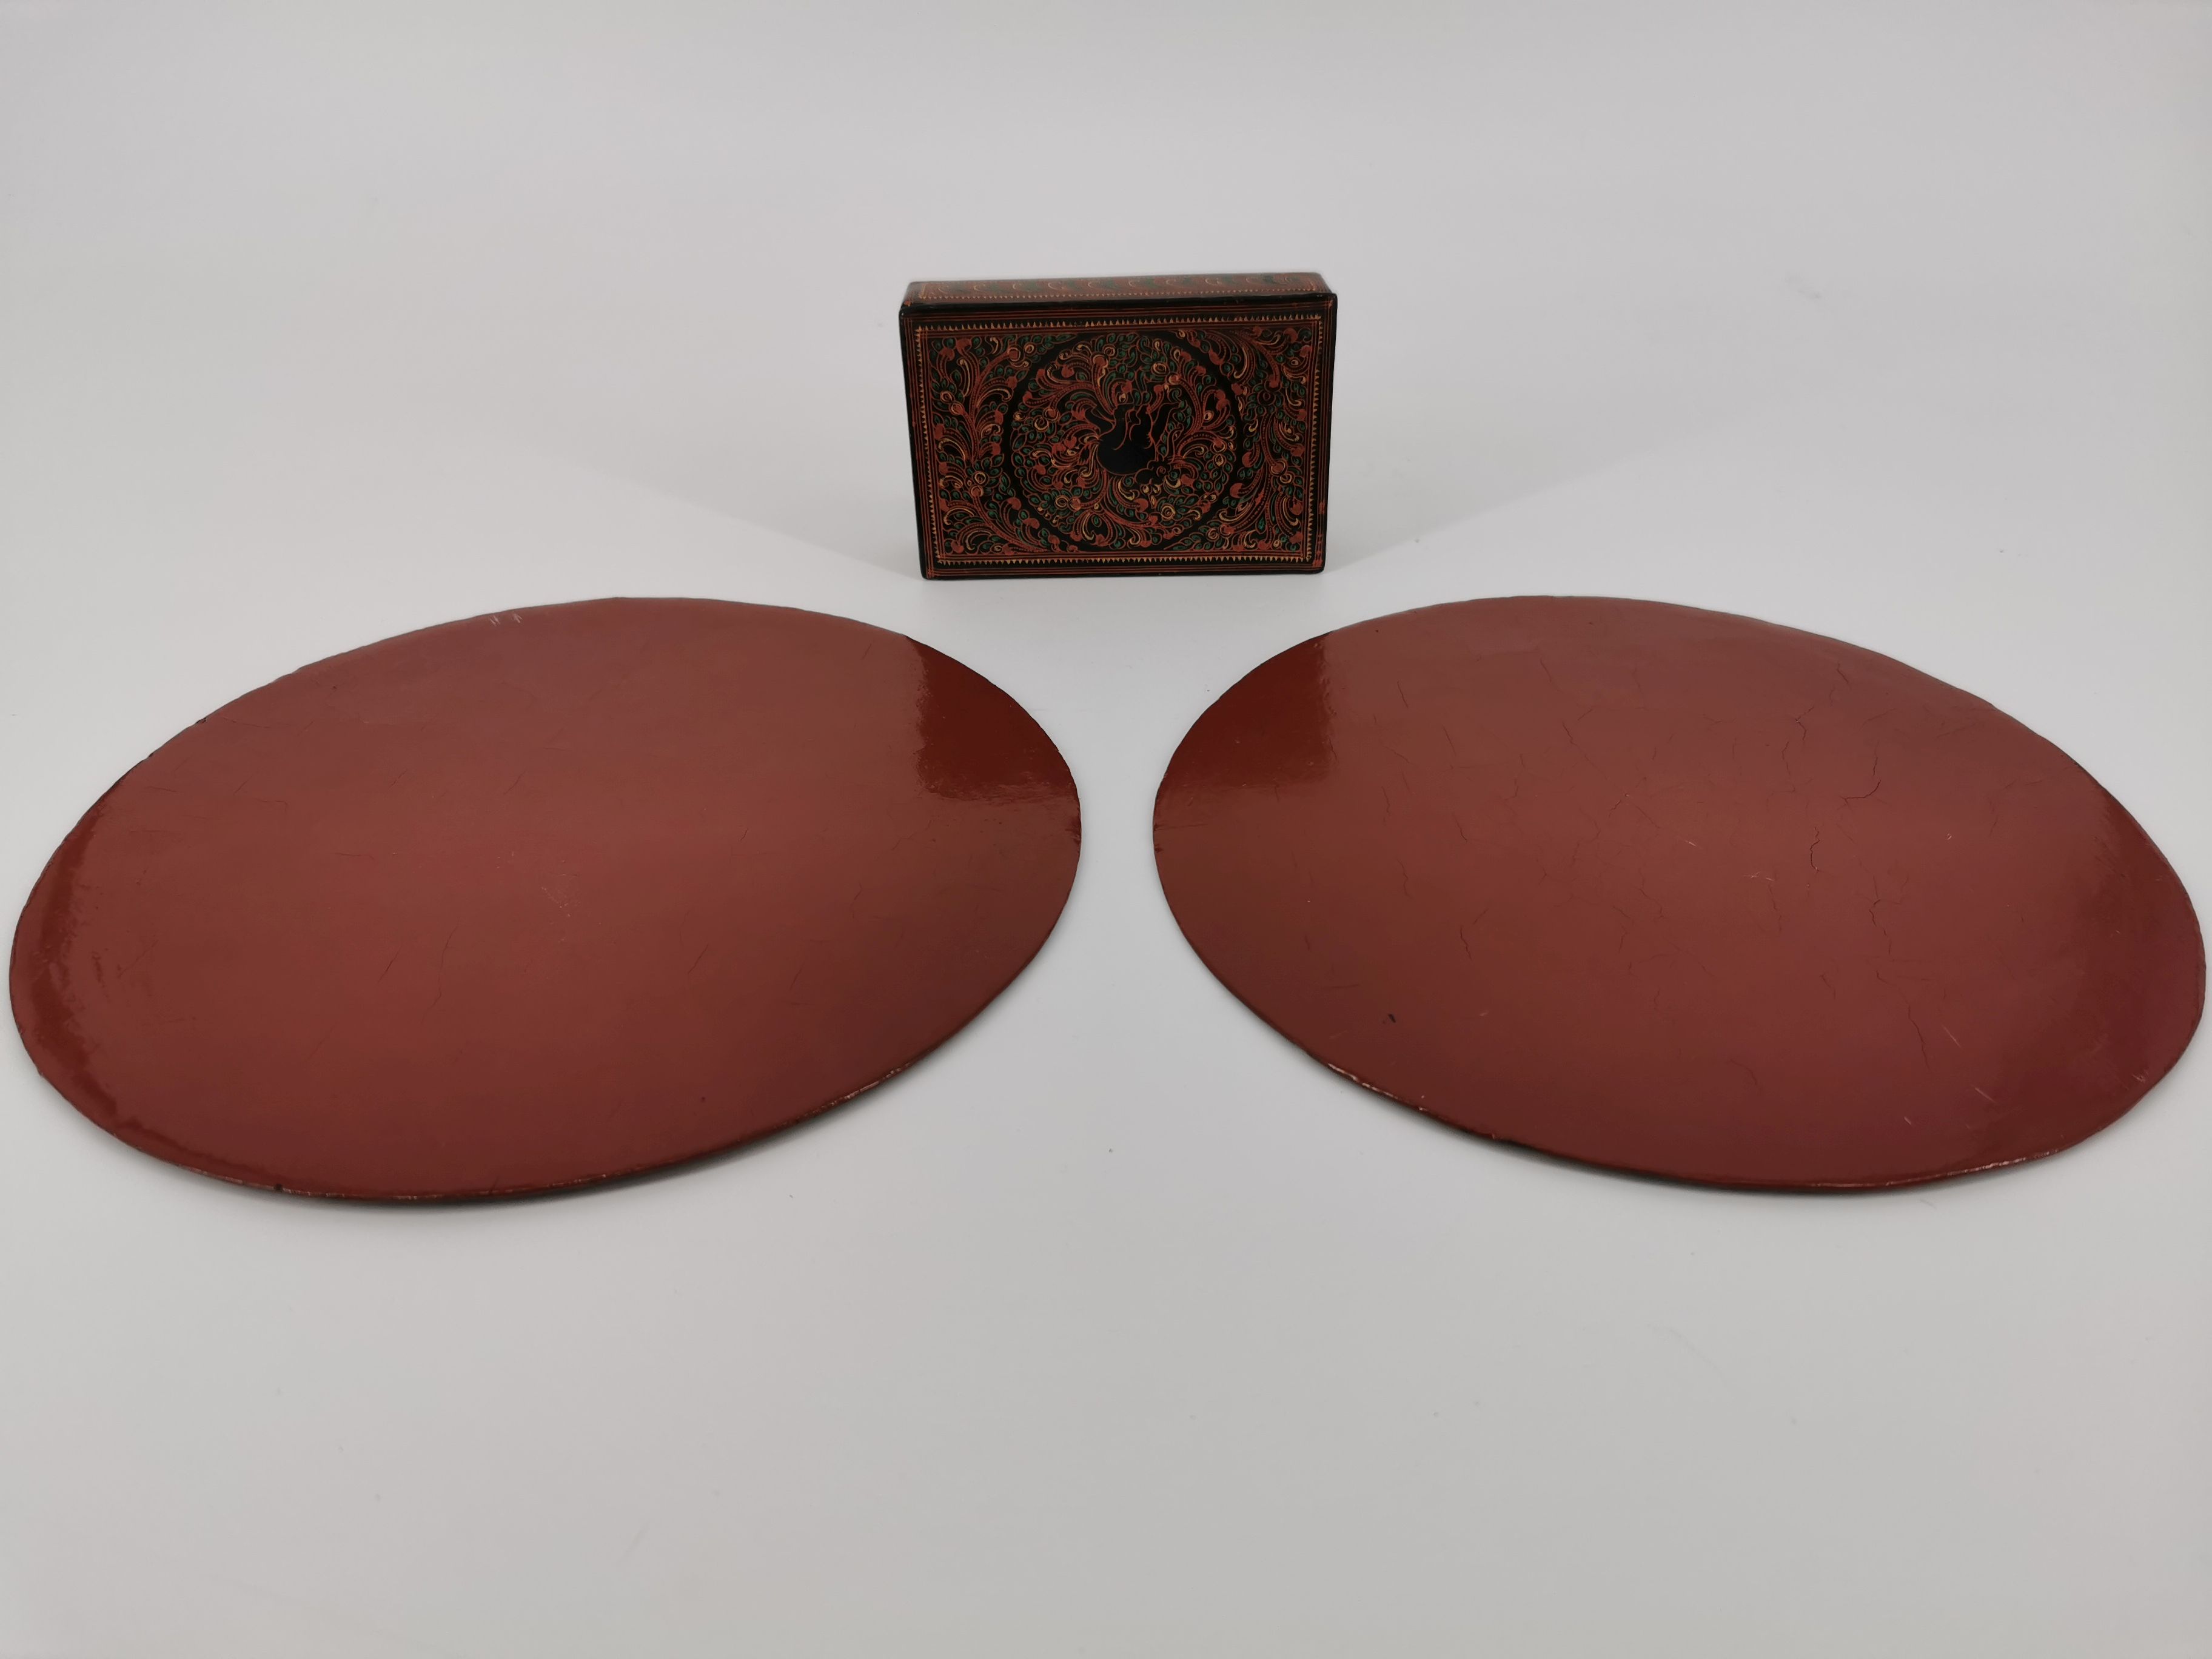 LACQUER DISCS AND A BOX - Image 3 of 3